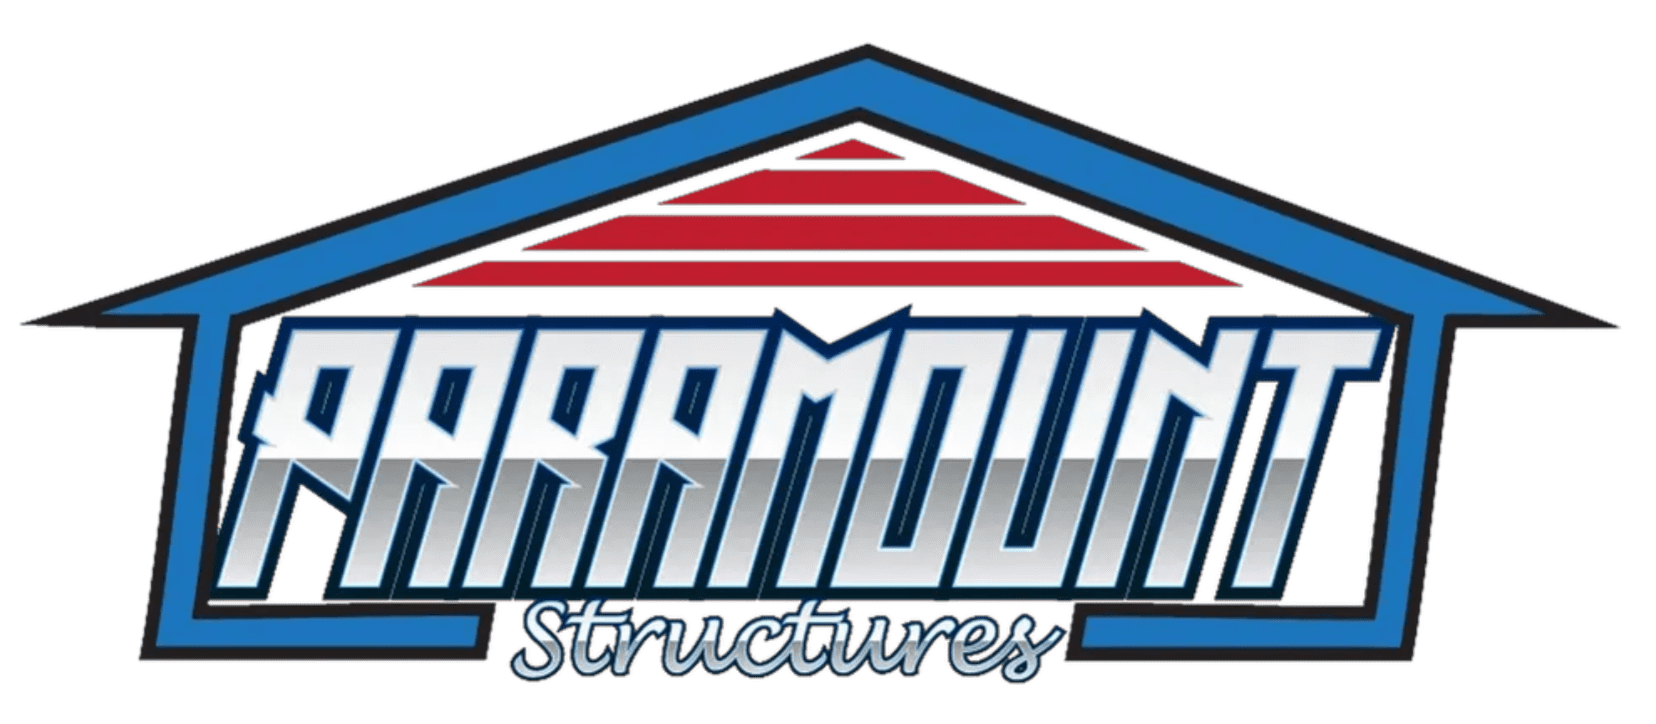 A logo of paramount structures